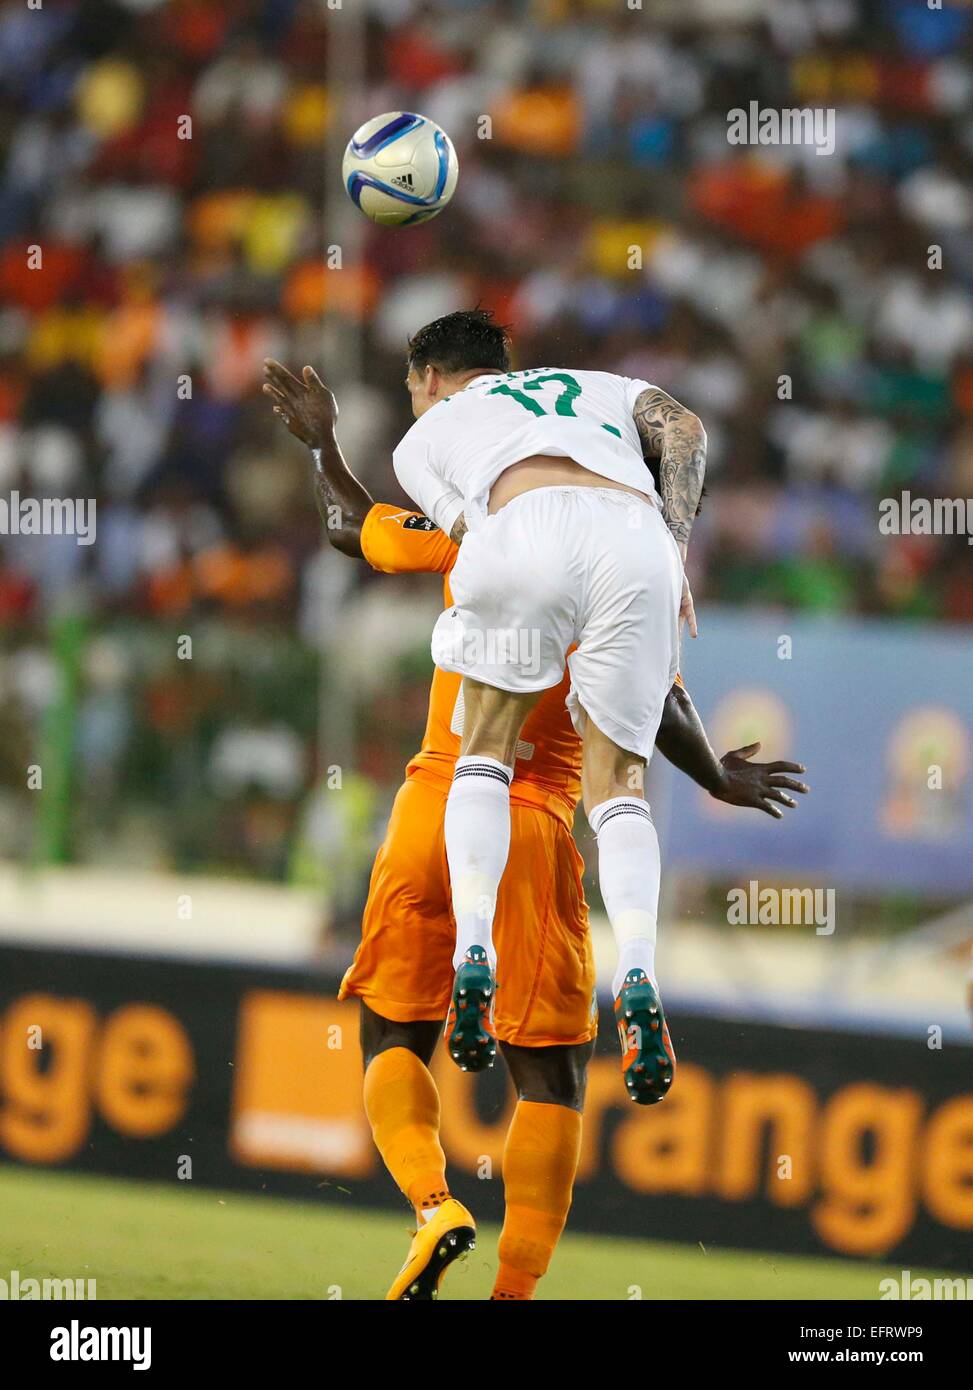 Carl Medjani  of Algeria in anaerial tackled against Ivory Coast during their AFCON 2015 Quarter Finals Match on February 1 2015 at Estadio de Malabo Equatorial Guinea. Photo/Mohammed Amin/www.pic-centre.com (Equatorial Guinea) Stock Photo